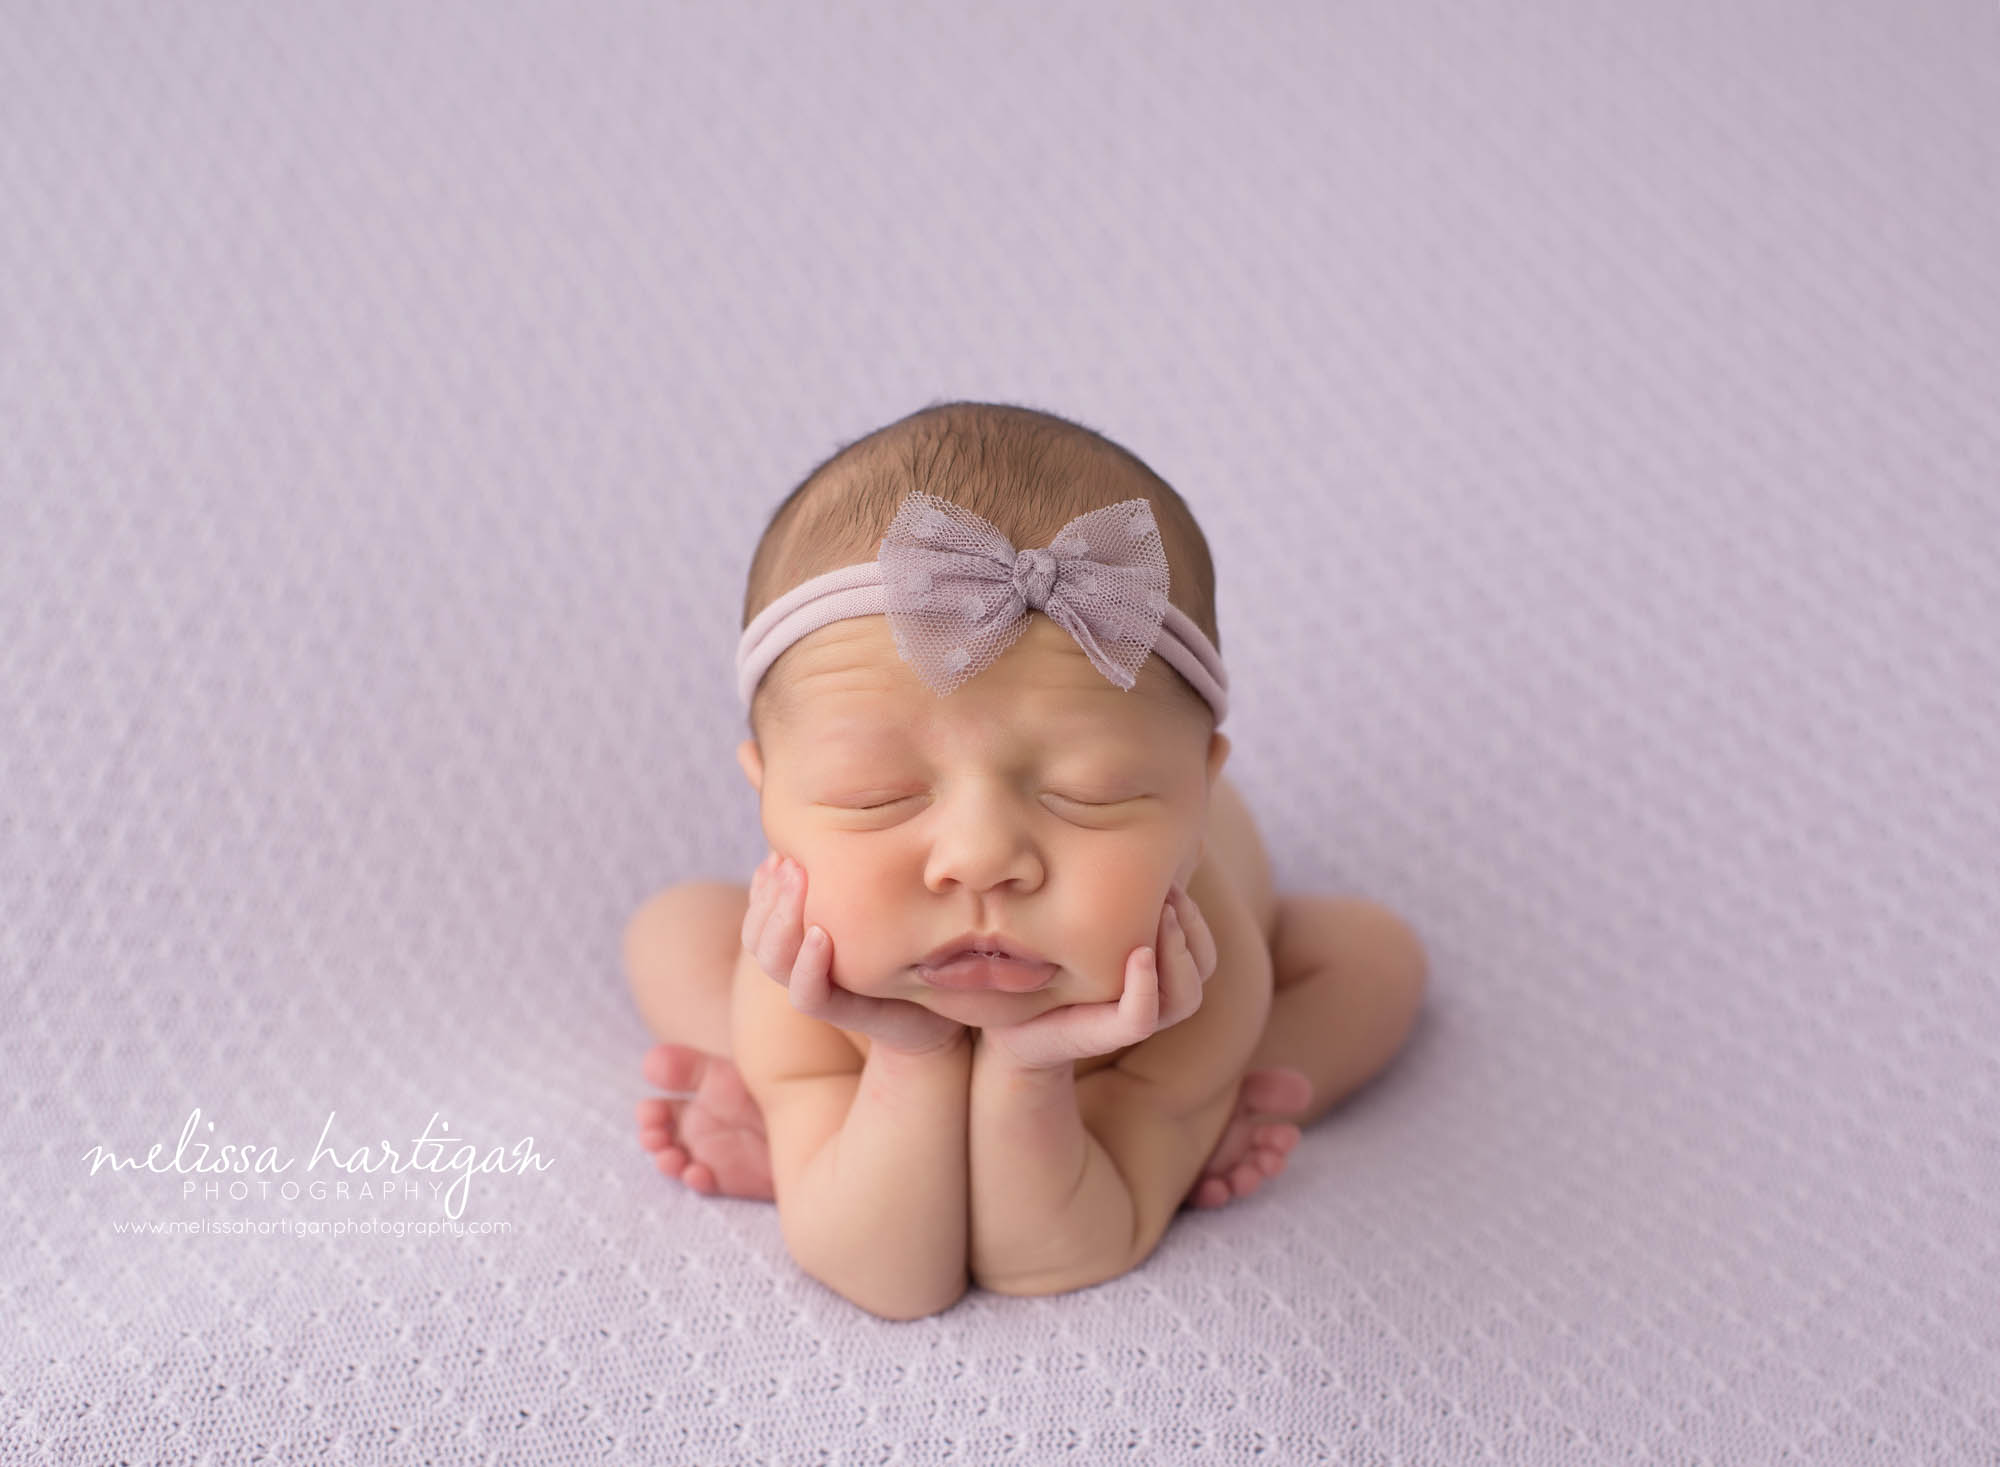 Baby girl in froggy pose on lavender blanket newborn photography in CT photography studio Melissa Hartigan